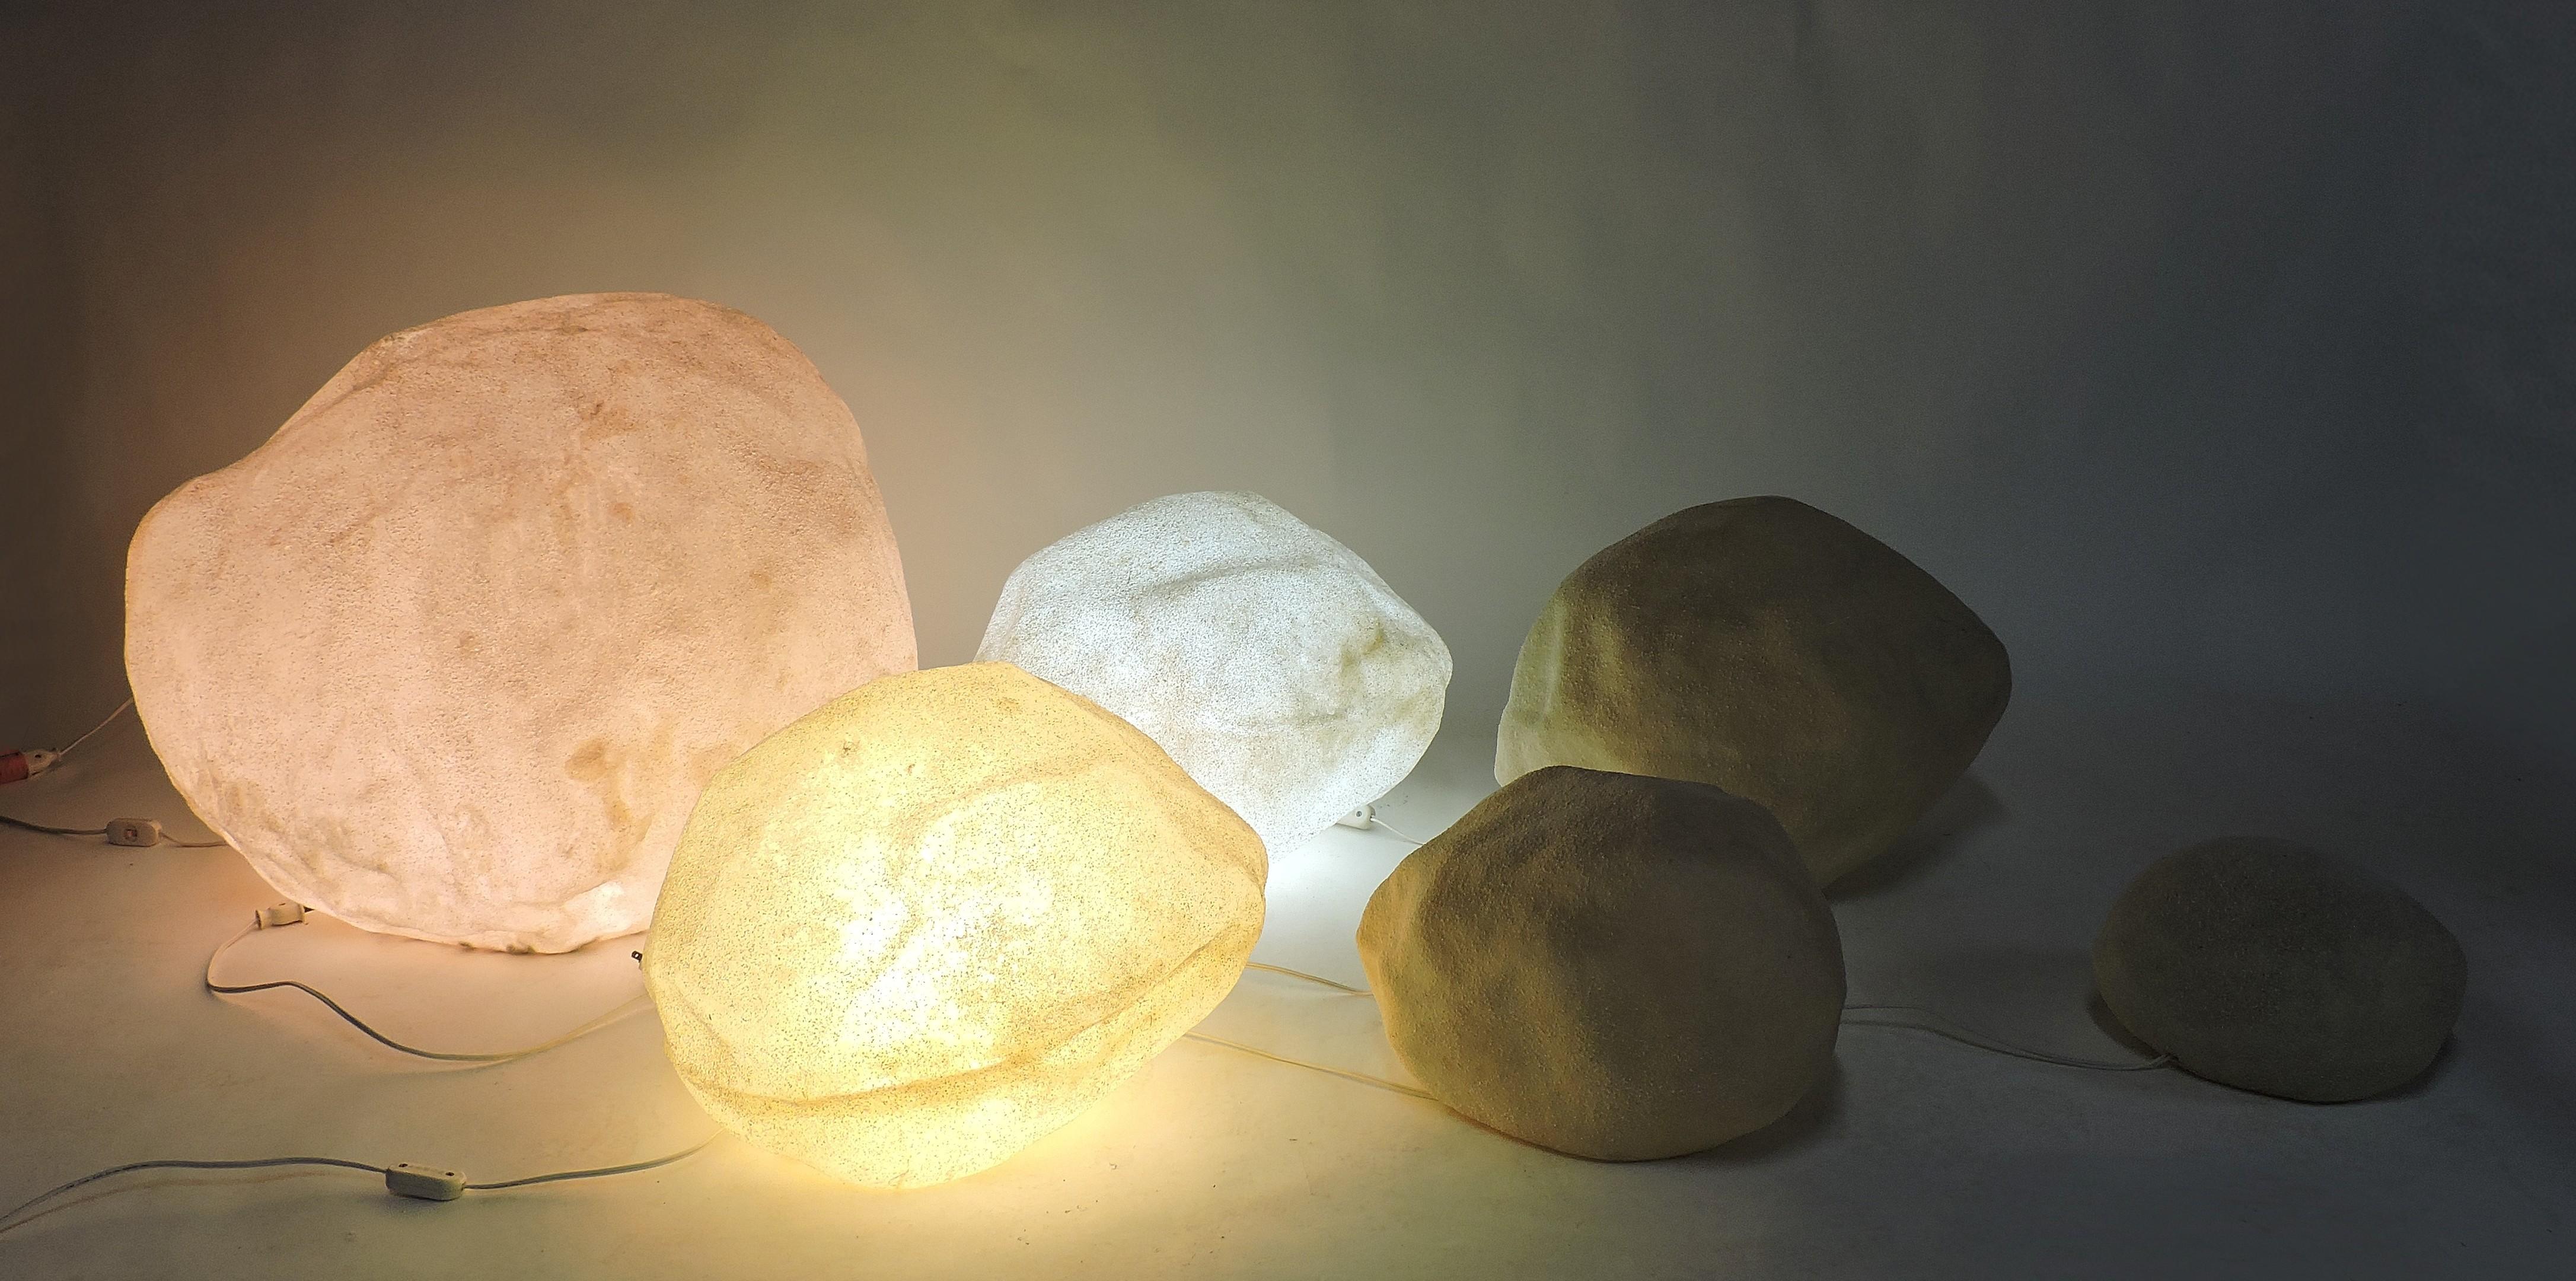 Very cool set of six luminescent moon rocks designed by Andre Cazenave and manufactured in Italy by Singleton in the 1970s. These lamps are made of translucent resin with marble powder inclusions and glow with a soft ambient light when lit. This